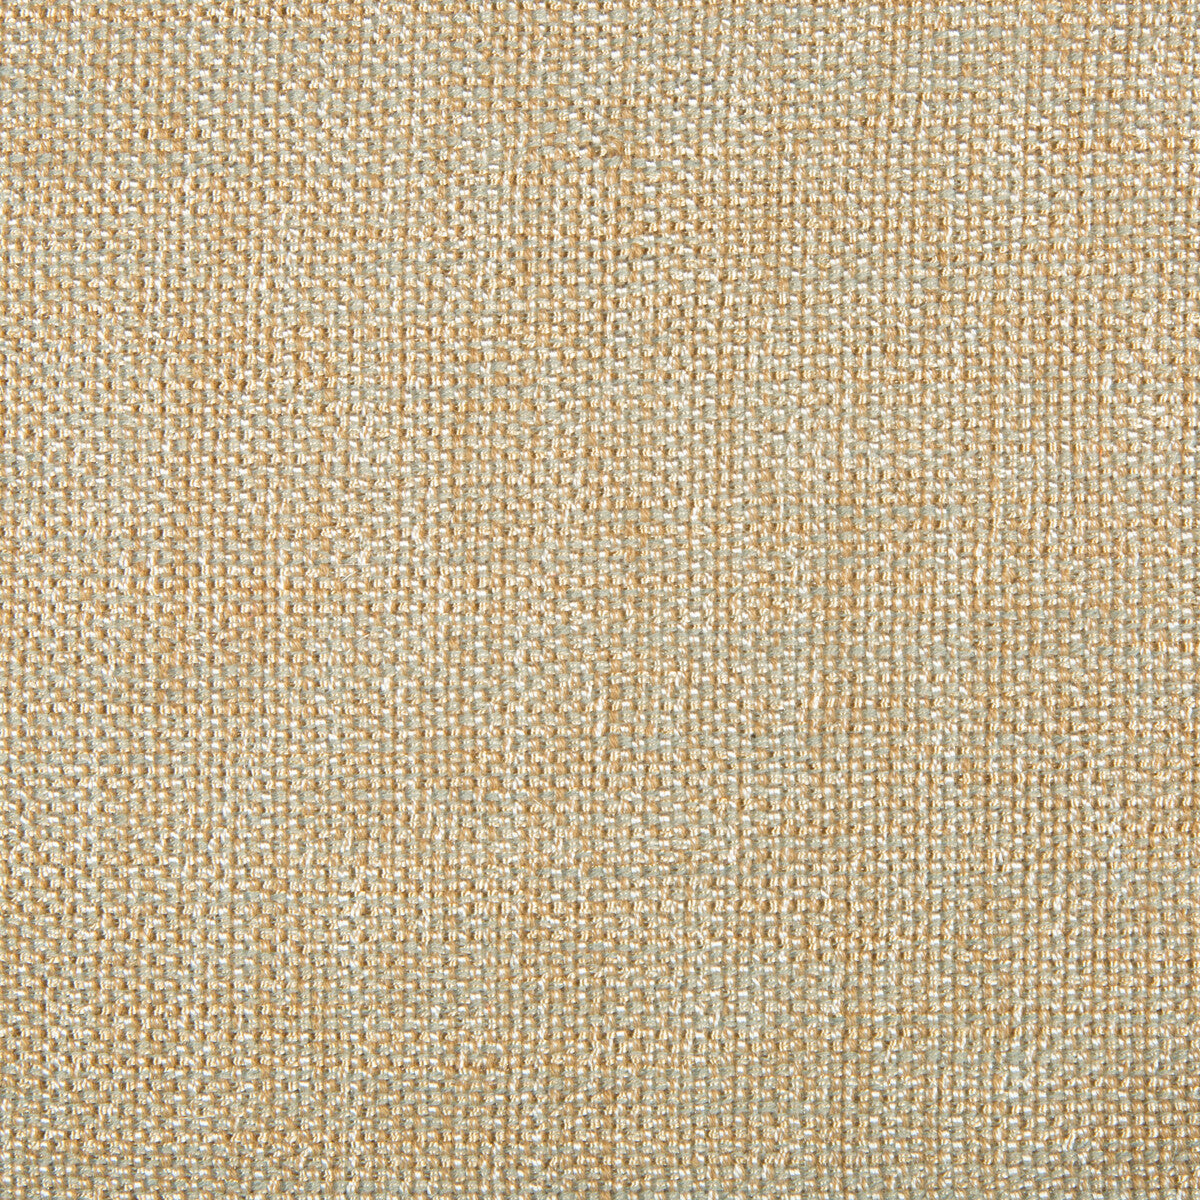 Kravet Contract fabric in 34926-1611 color - pattern 34926.1611.0 - by Kravet Contract